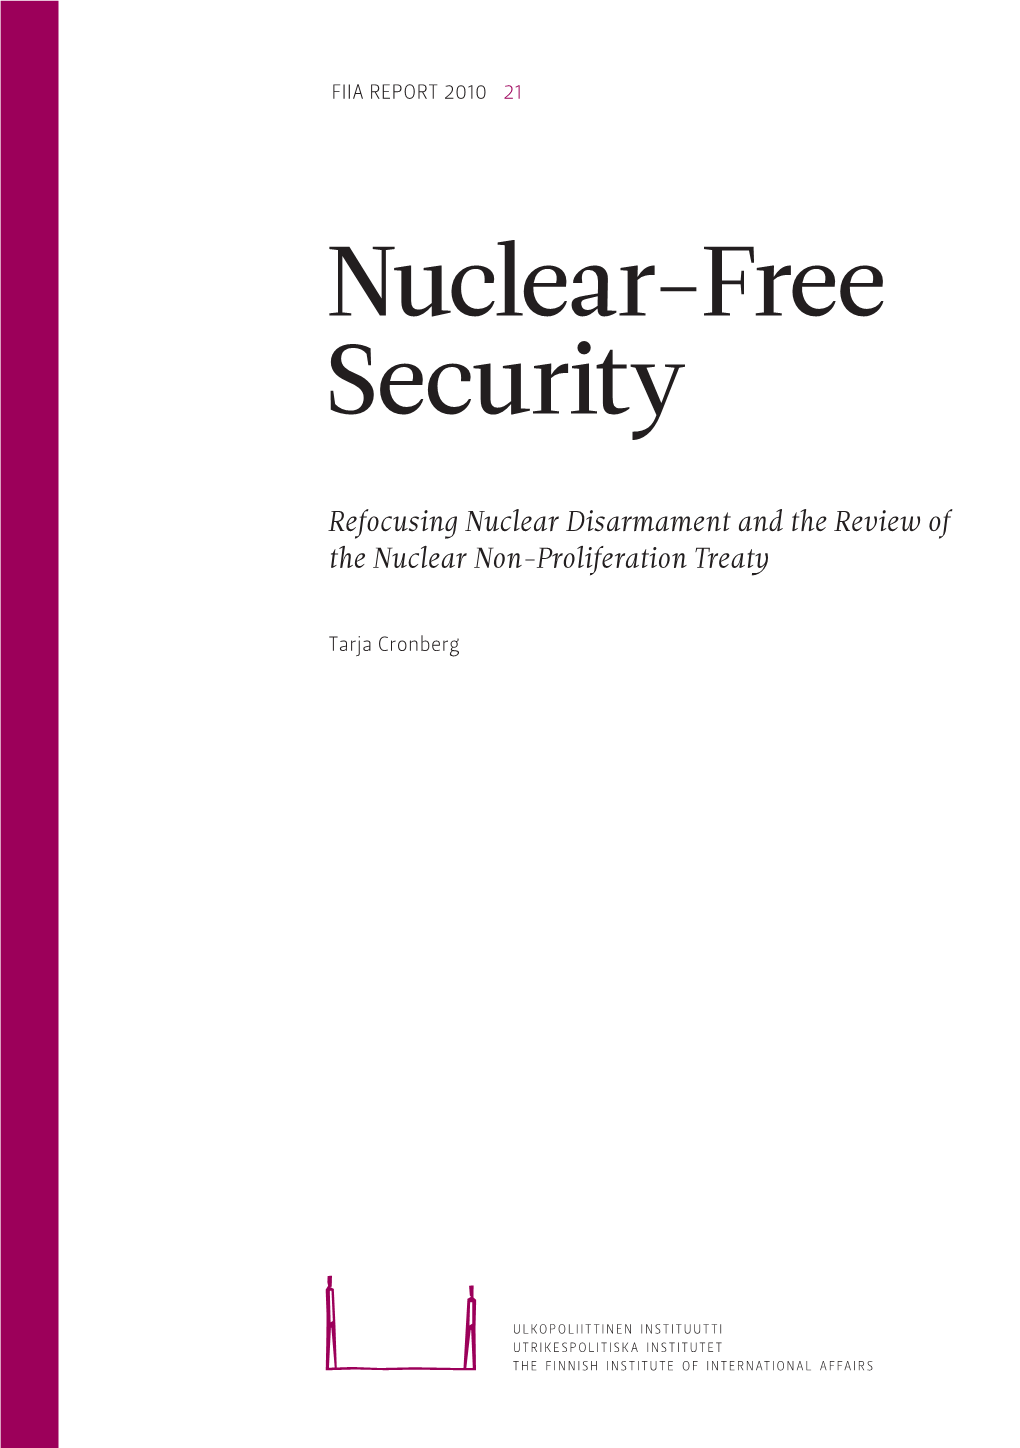 Refocusing Nuclear Disarmament and the Review of the Nuclear Non-Proliferation Treaty